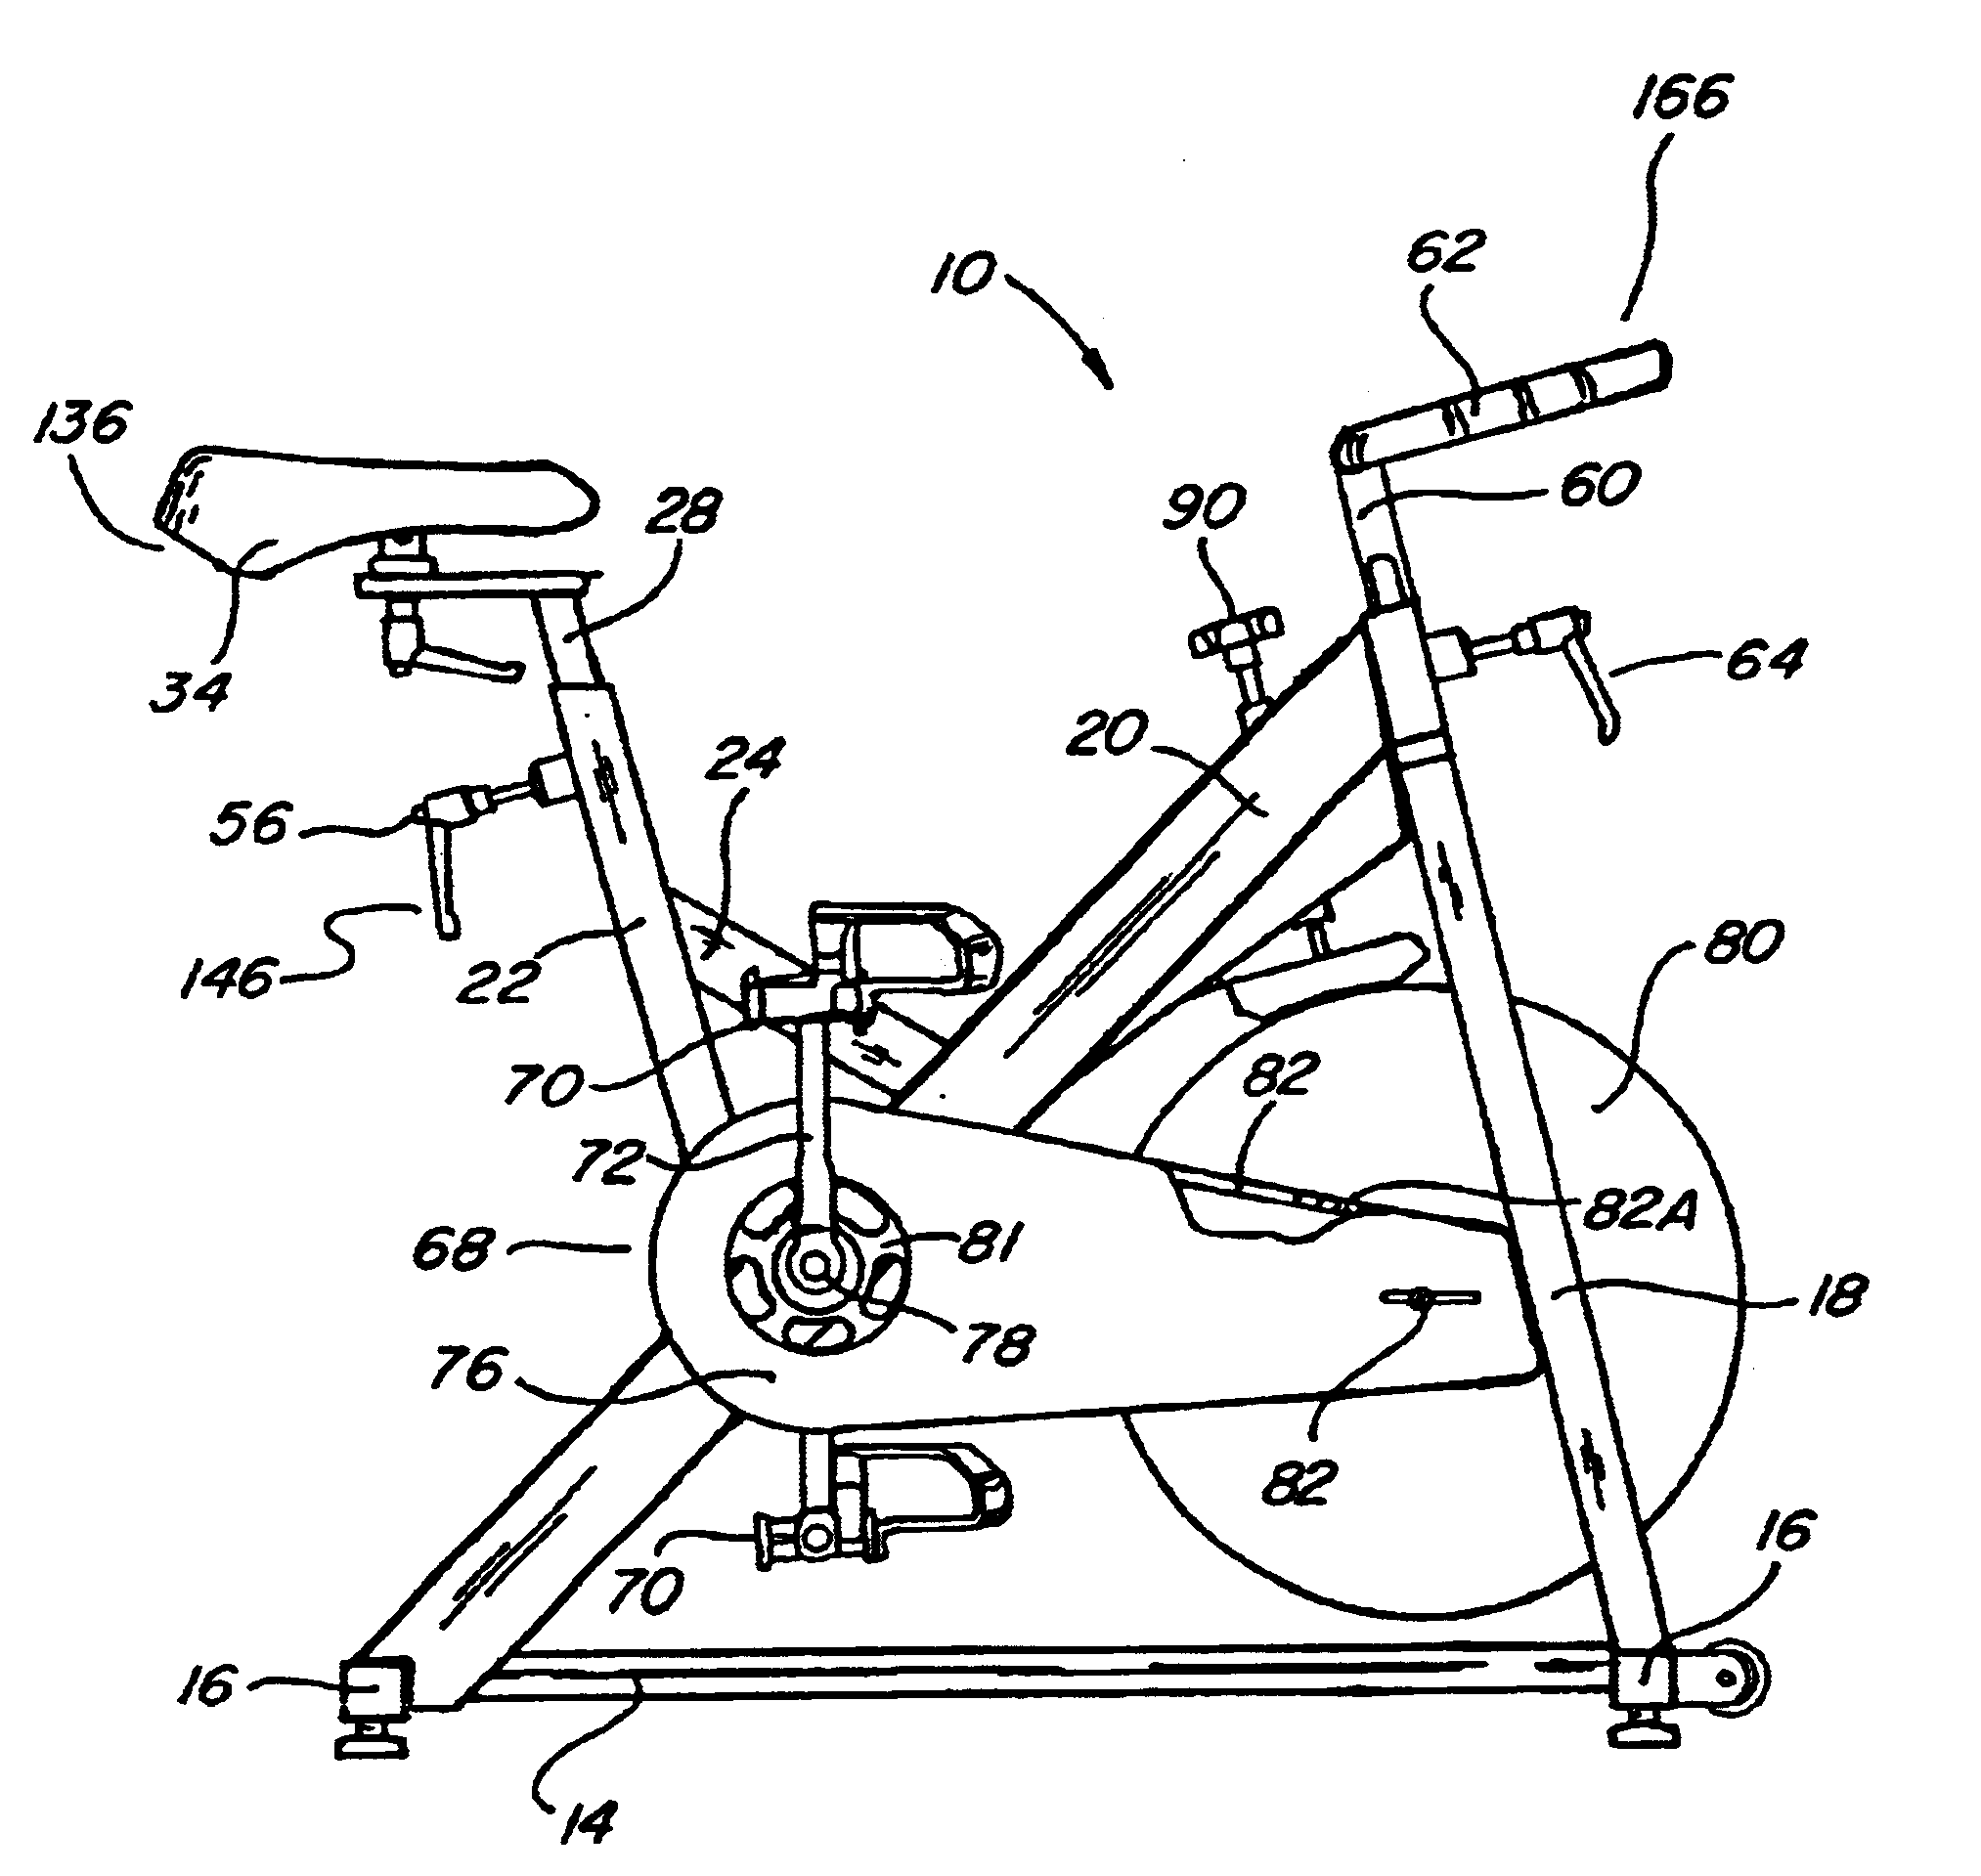 Stationary exercise bicycle